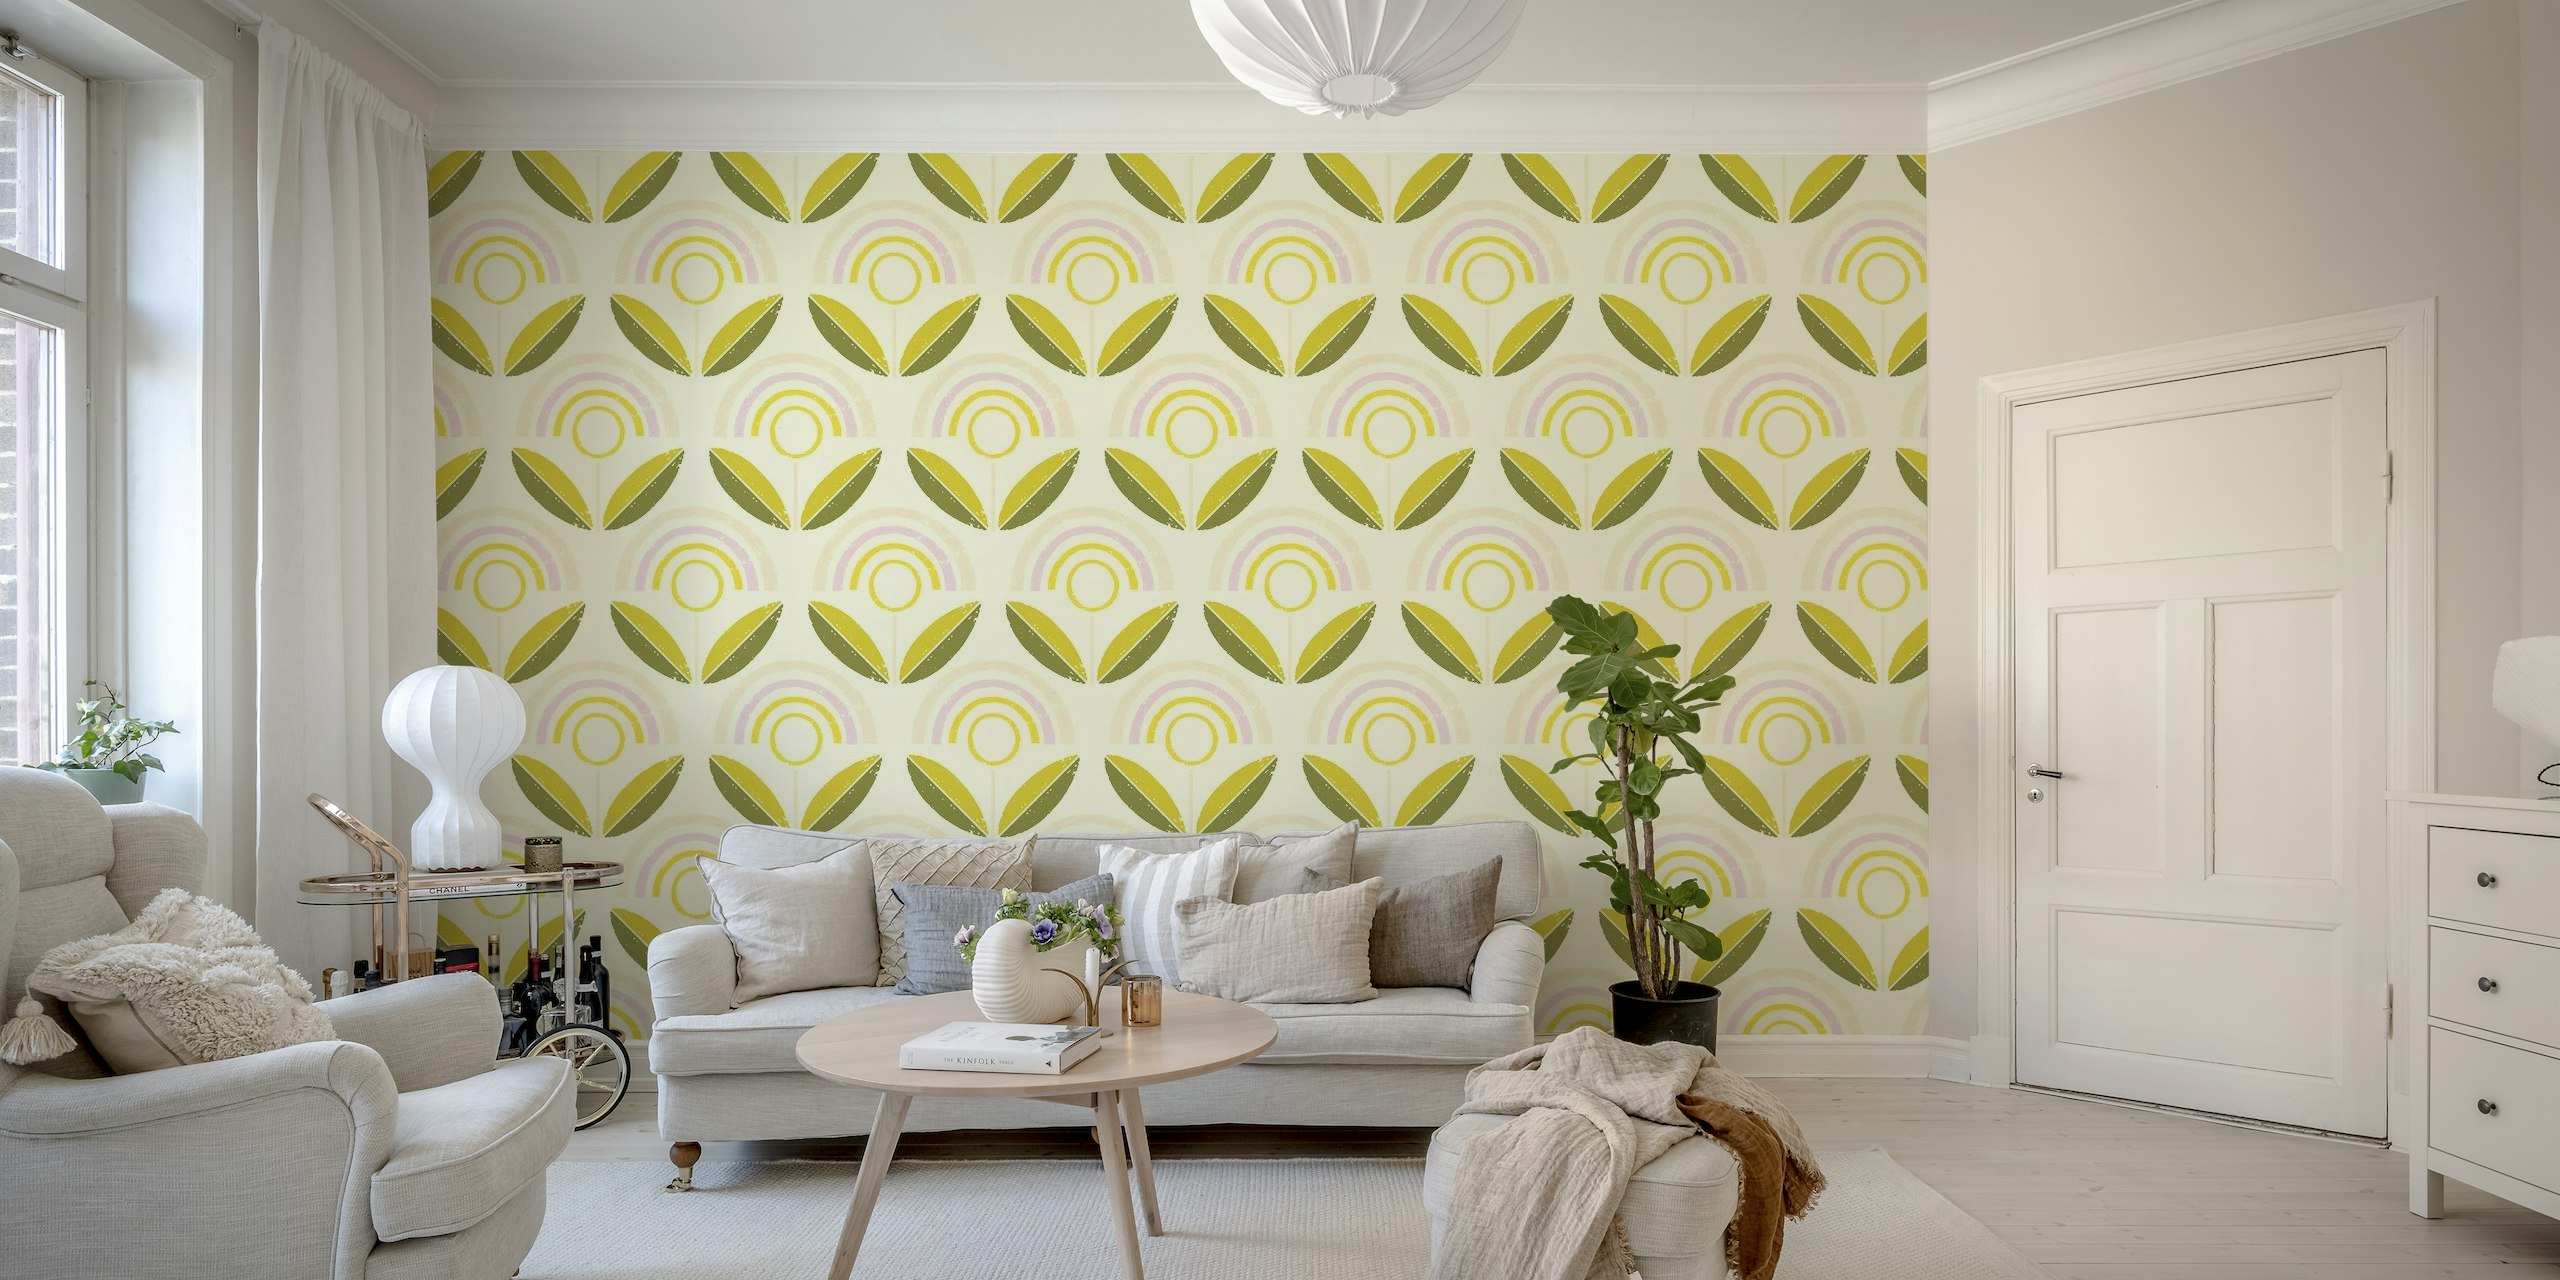 Retro lime and blush sunflower pattern wall mural on a cream background